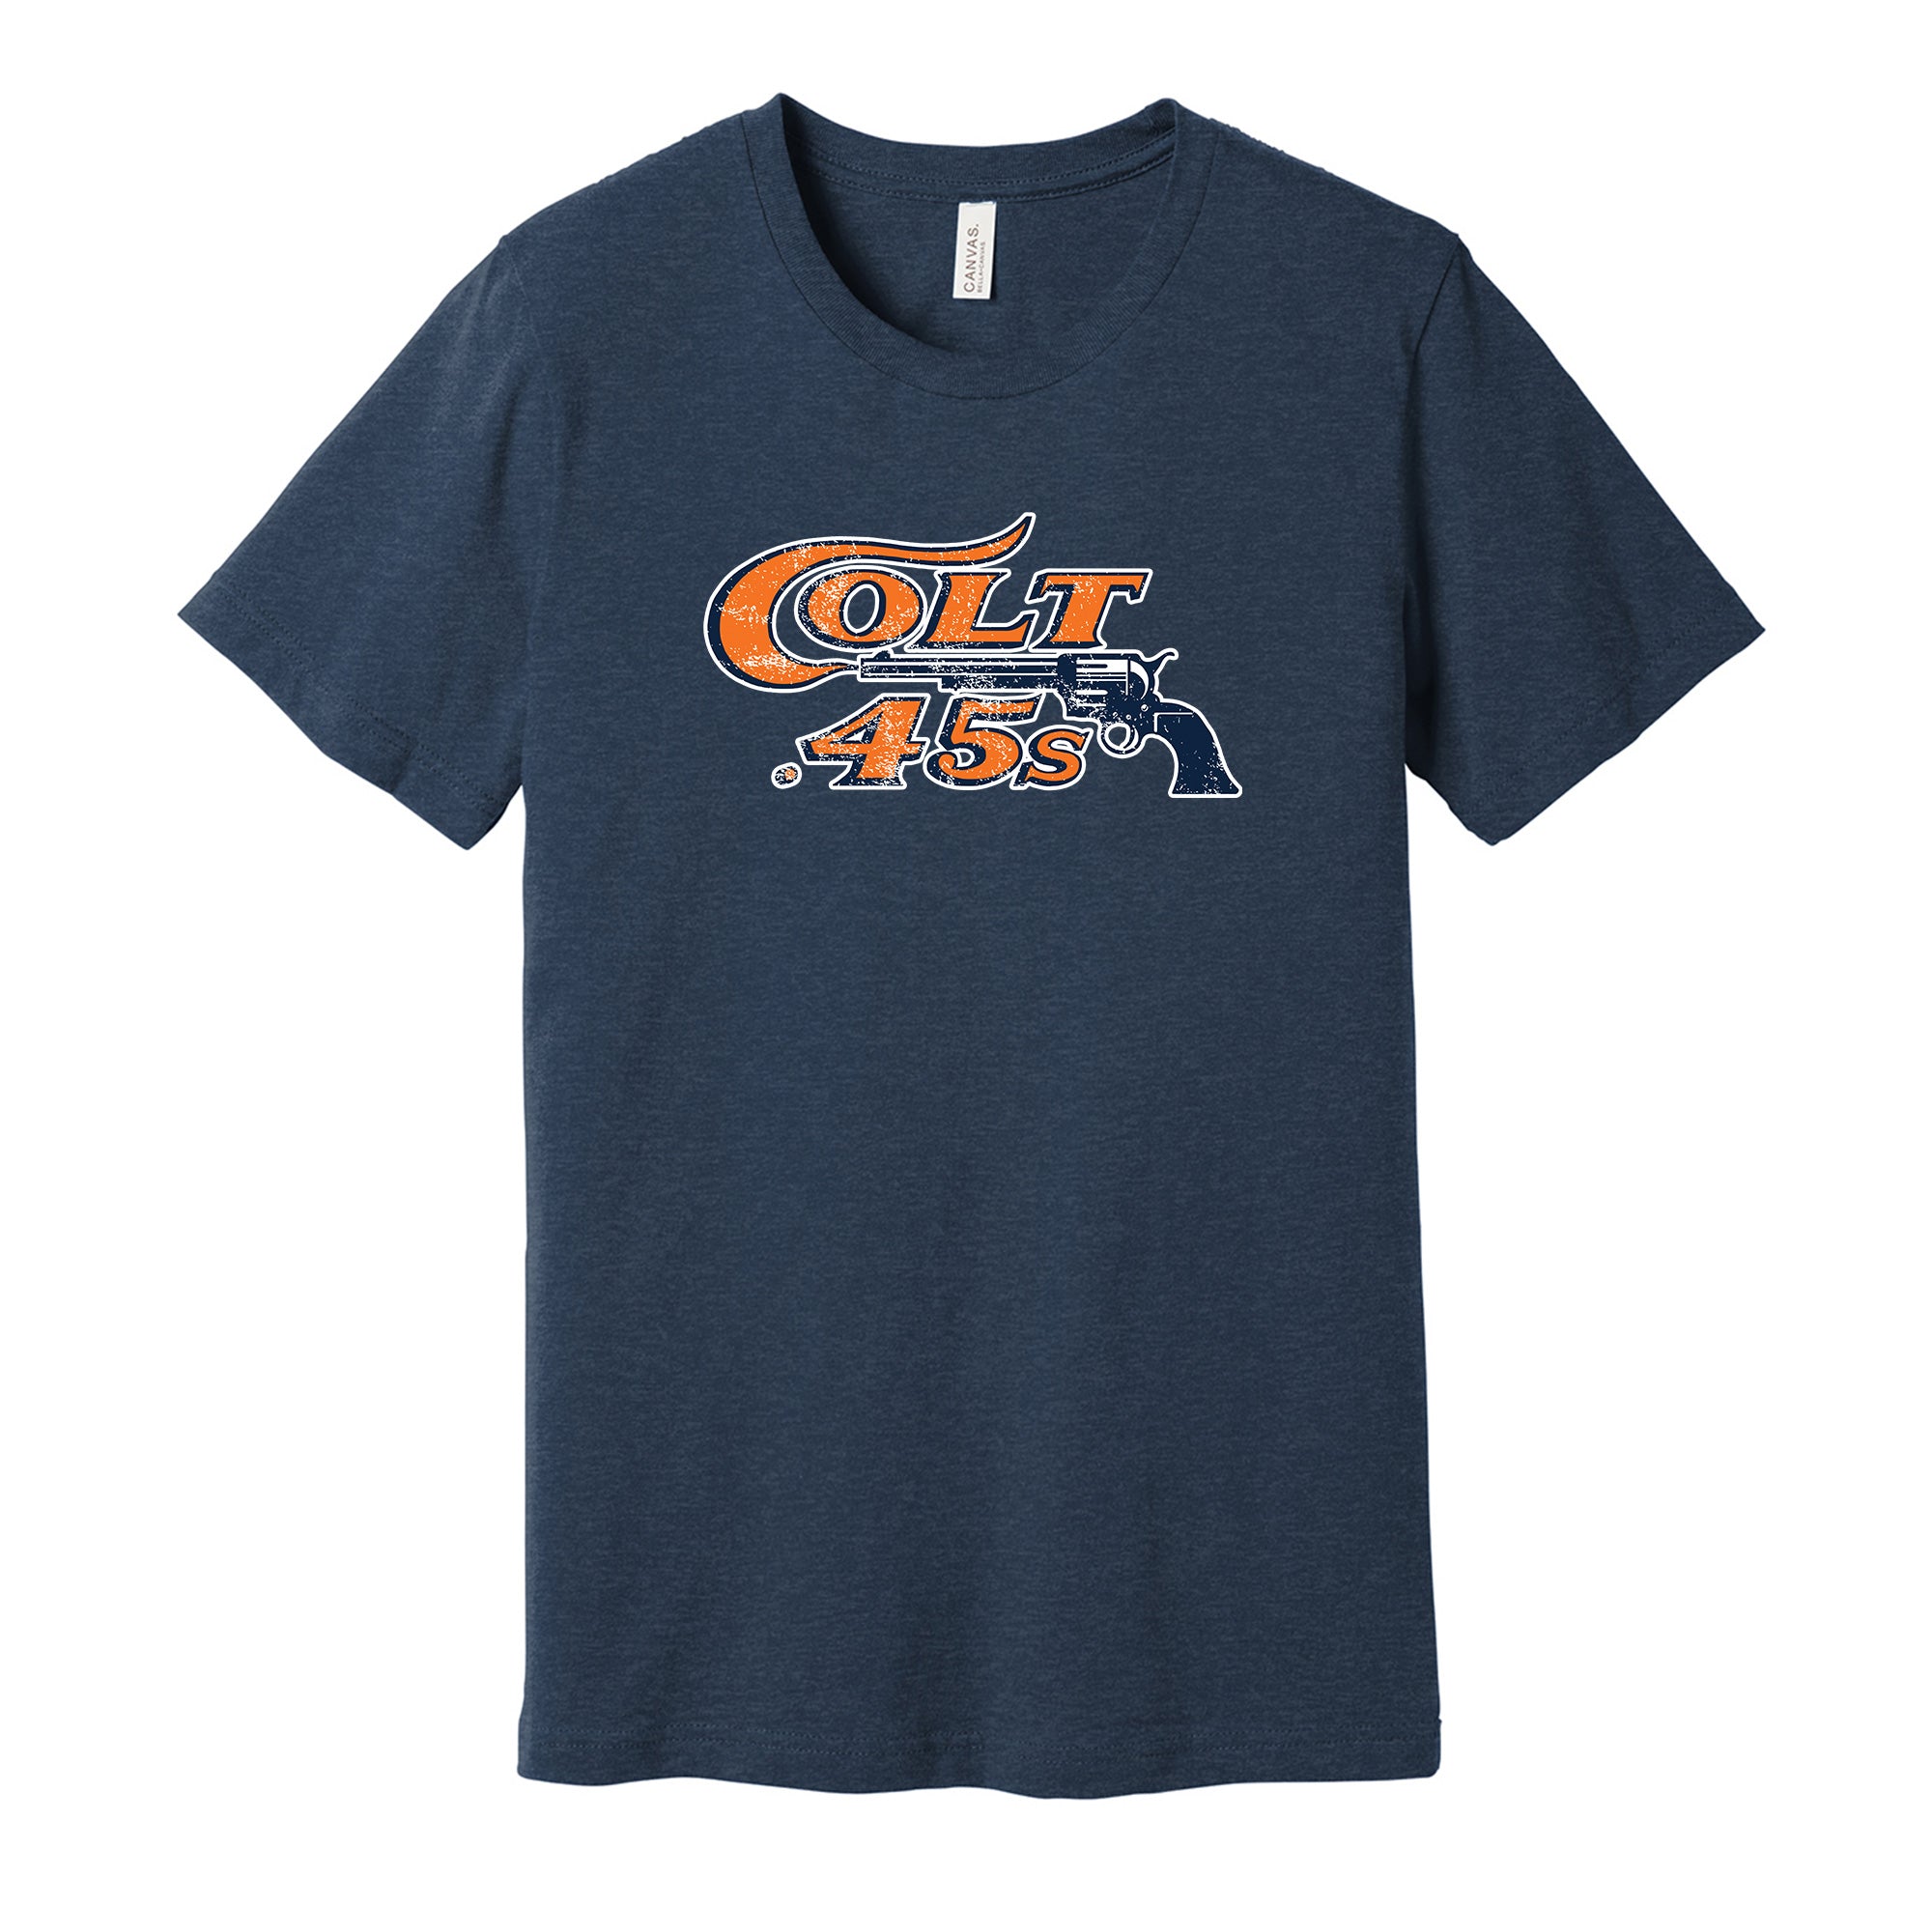 Hyper Than Hype Shirts Houston Colt 45s Distressed Logo Shirt - Defunct Sports Team - Celebrate Texas Heritage and History - Hyper Than Hype L / Navy Shirt